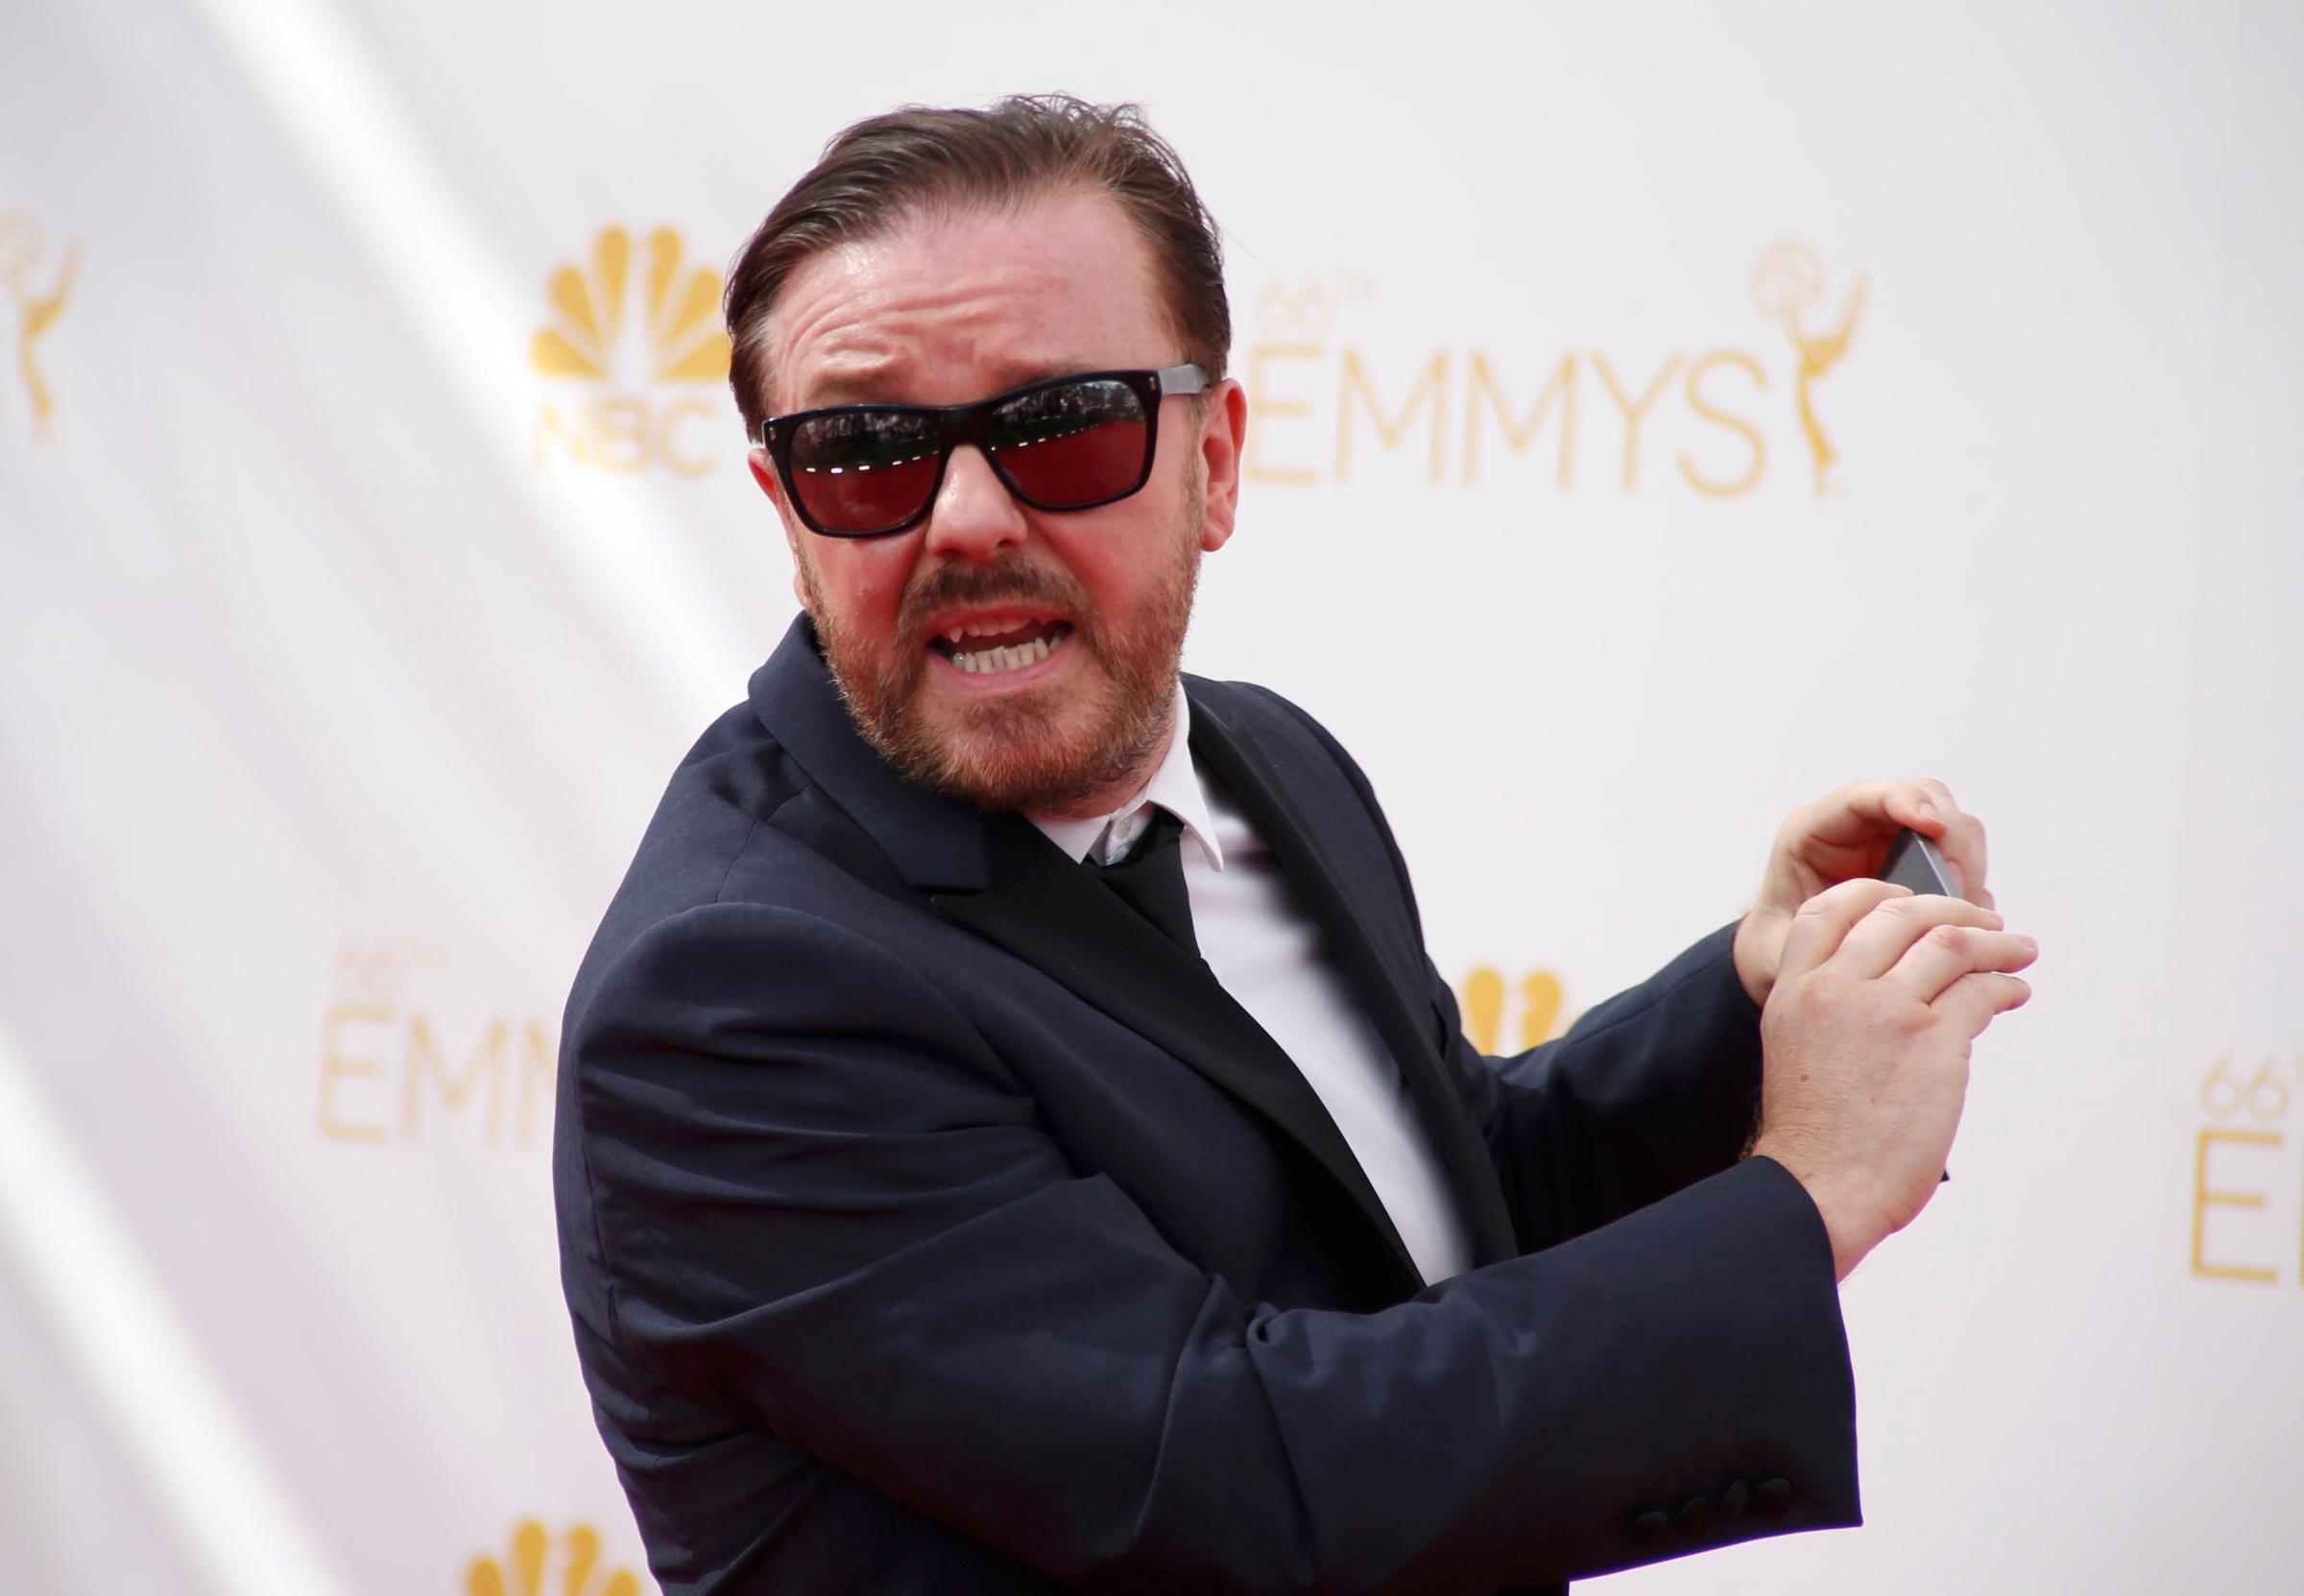 Actor Ricky Gervais arrives at the 66th Primetime Emmy Awards in Los Angeles